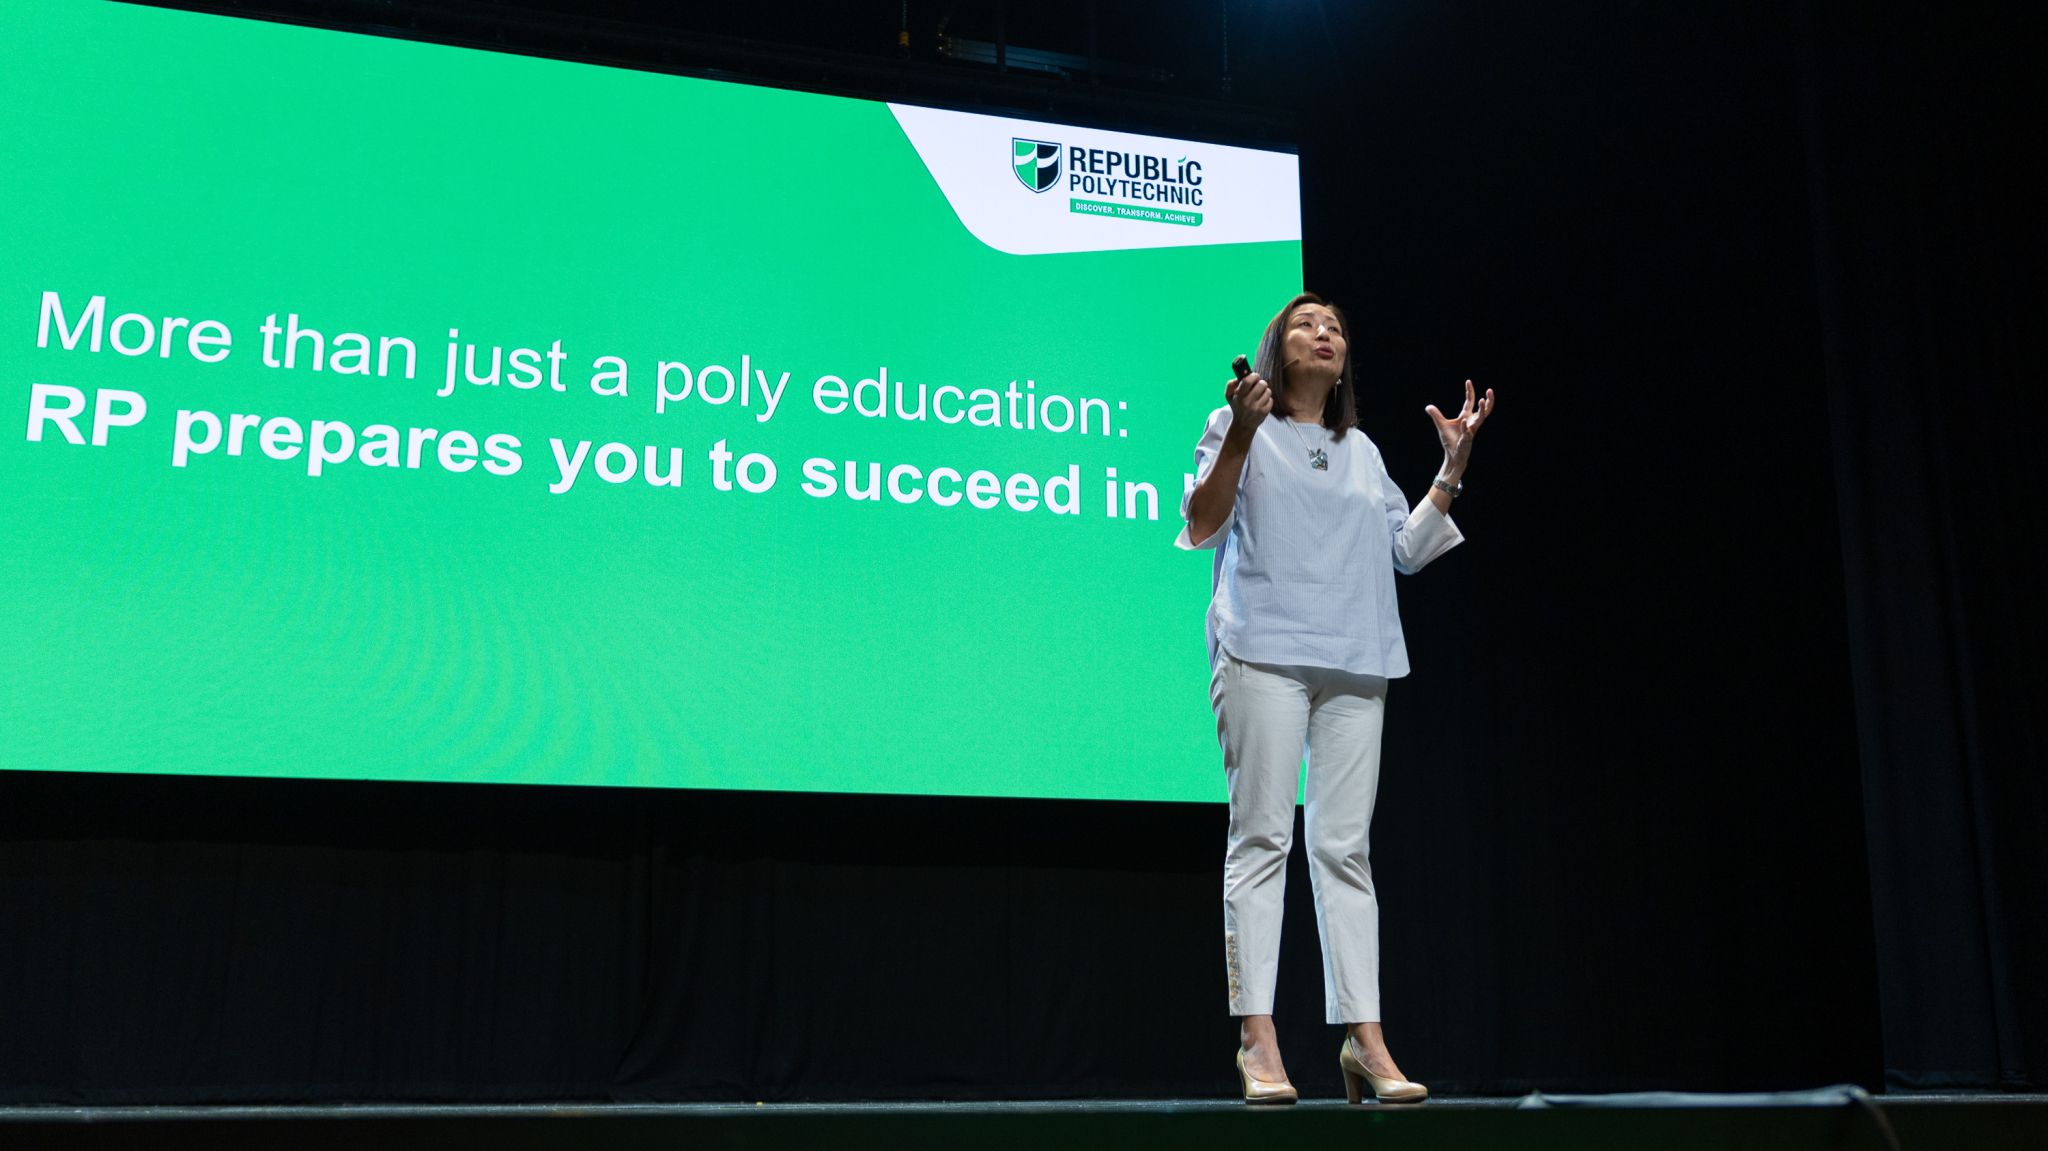 Ms Jeanne Liew, Principal & CEO of Republic Polytechnic giving an admissions talk on stage